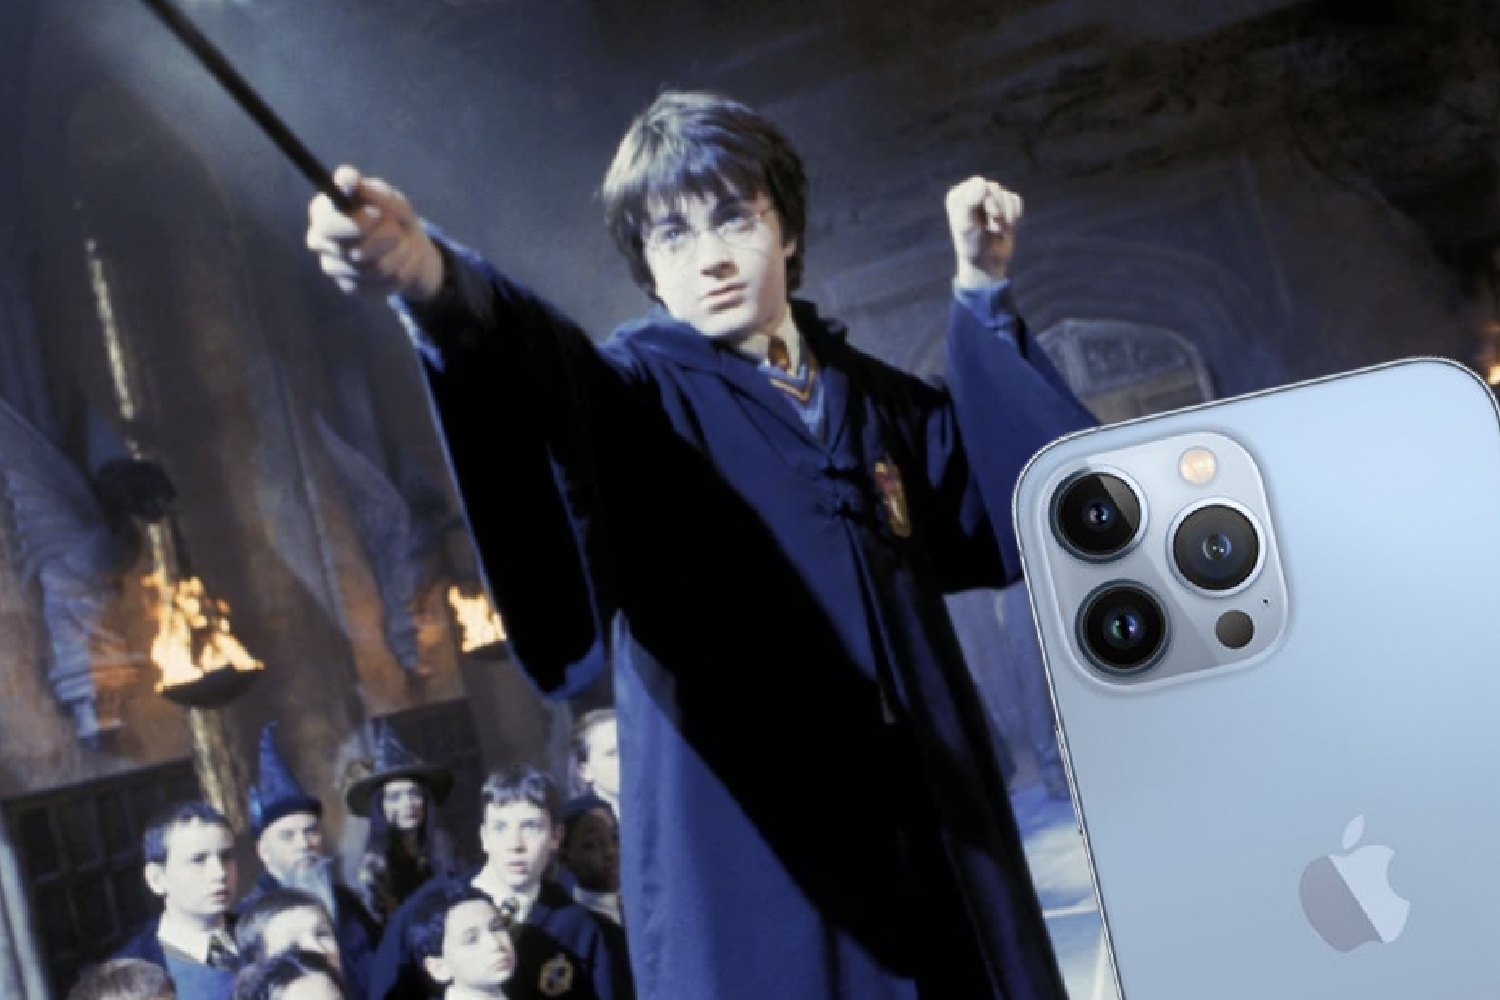 Siri can be used to create TEN Harry Potter spells for your iPhone